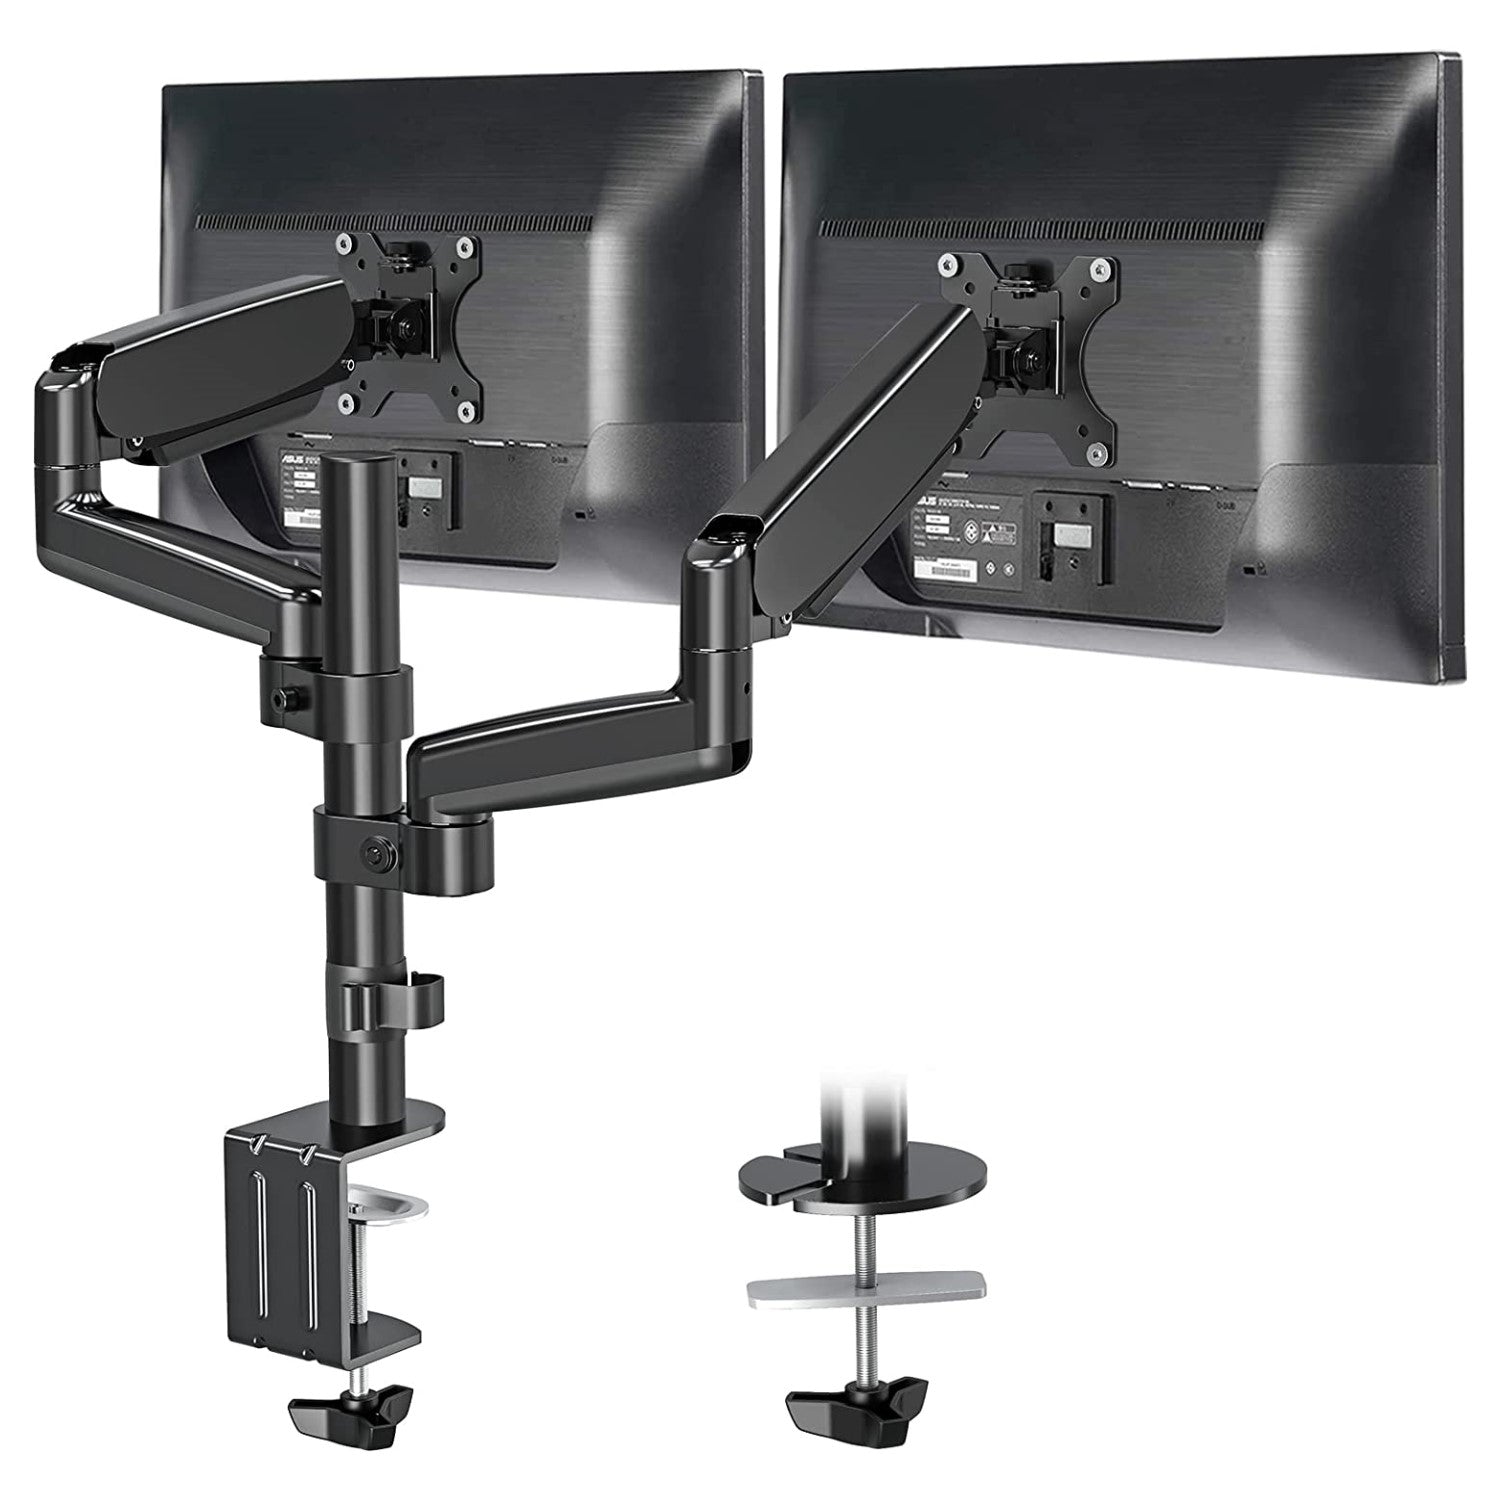 MOUNTUP Dual Monitor Desk Mount with Gas Spring Arm for 32'' Monitors